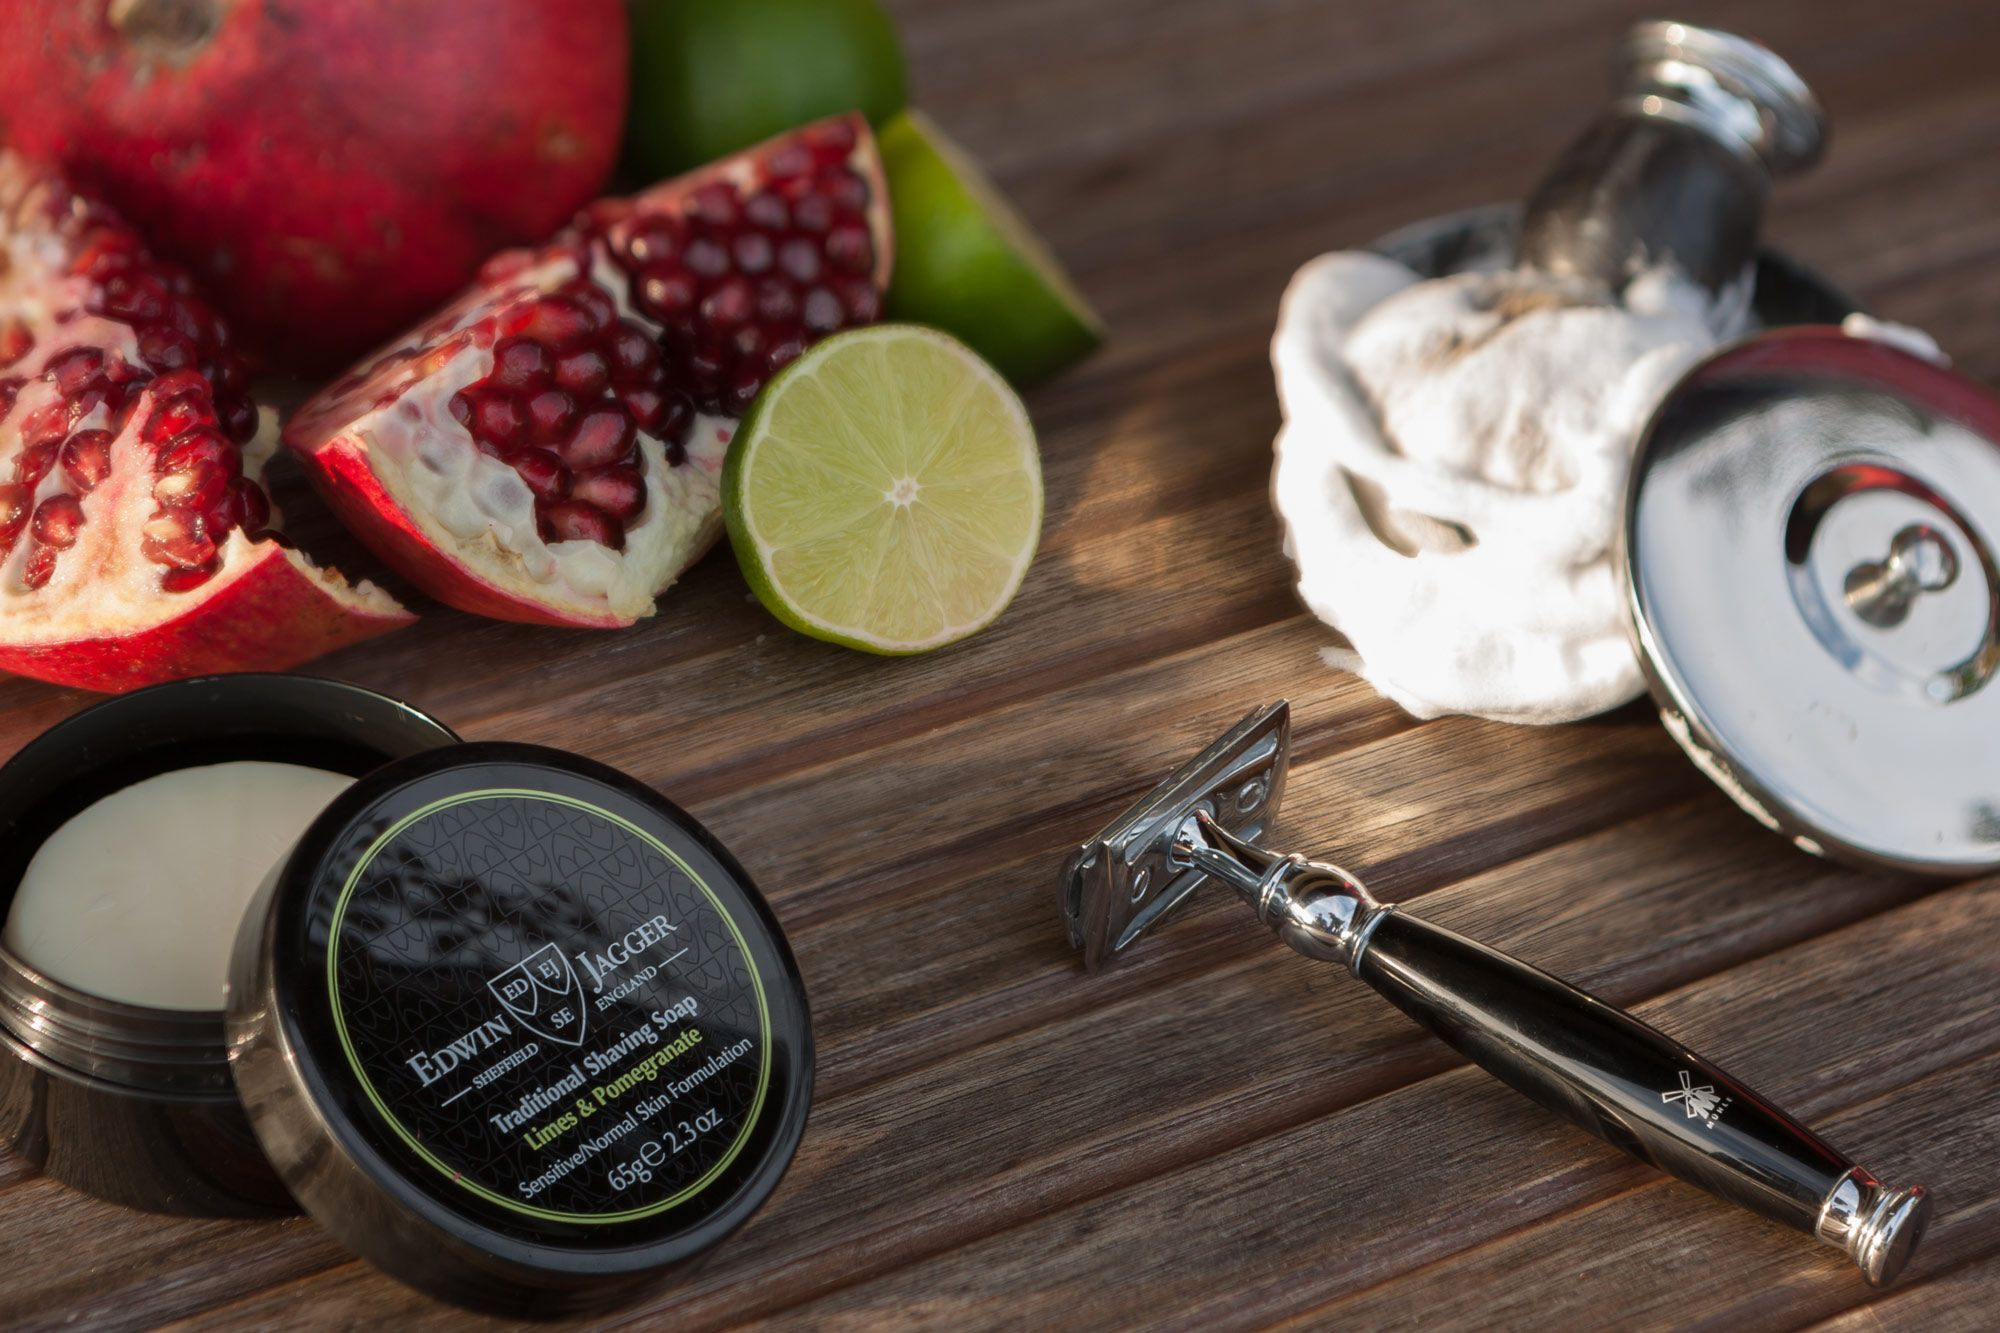 Shave of the day with Edwin Jagger Lime&Pomegranate Shaving Soap